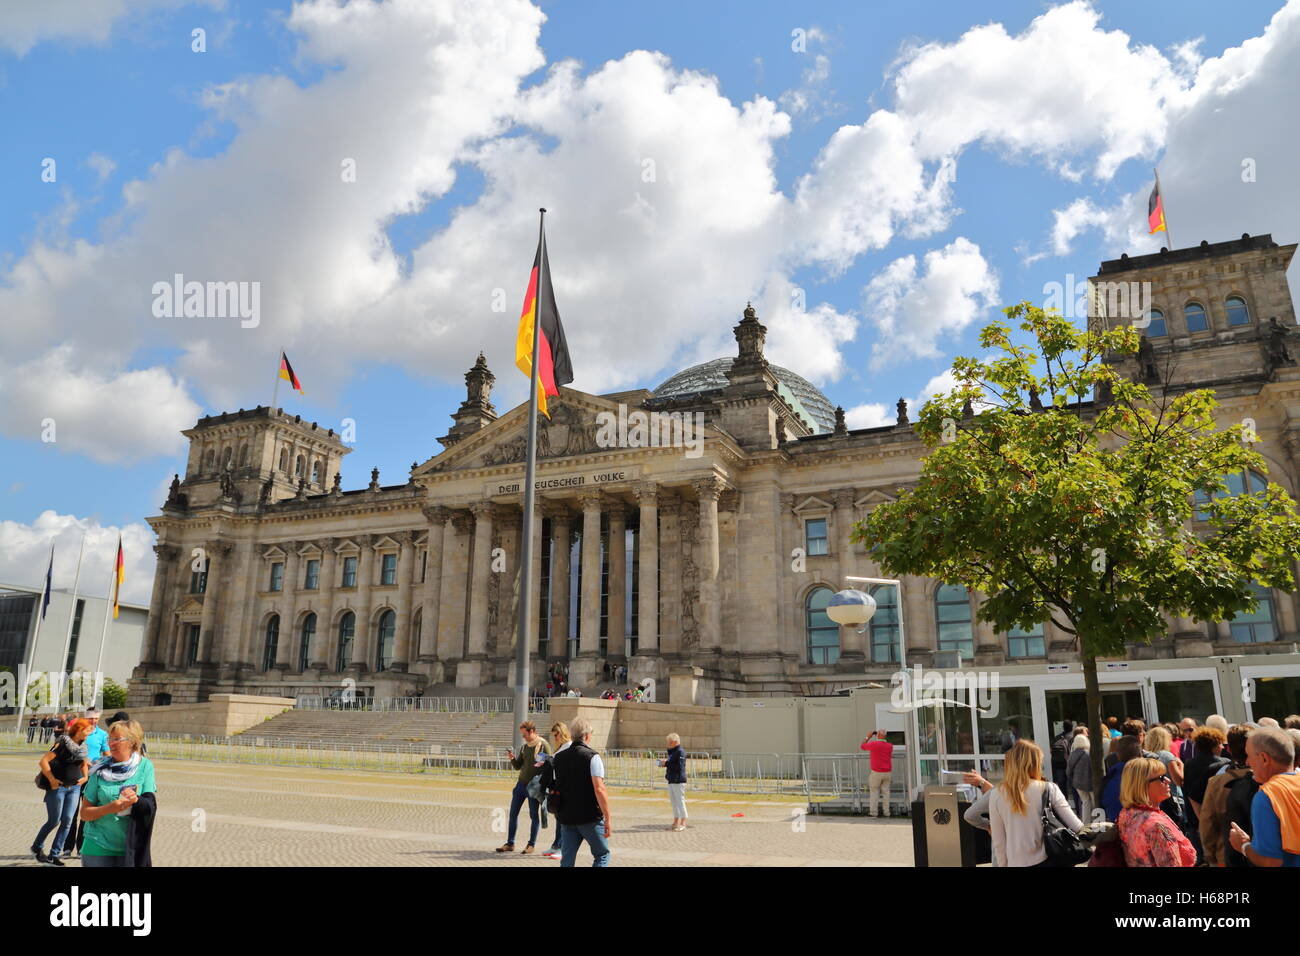 The Reichstag building in the German capital of Berlin, Germany Stock Photo